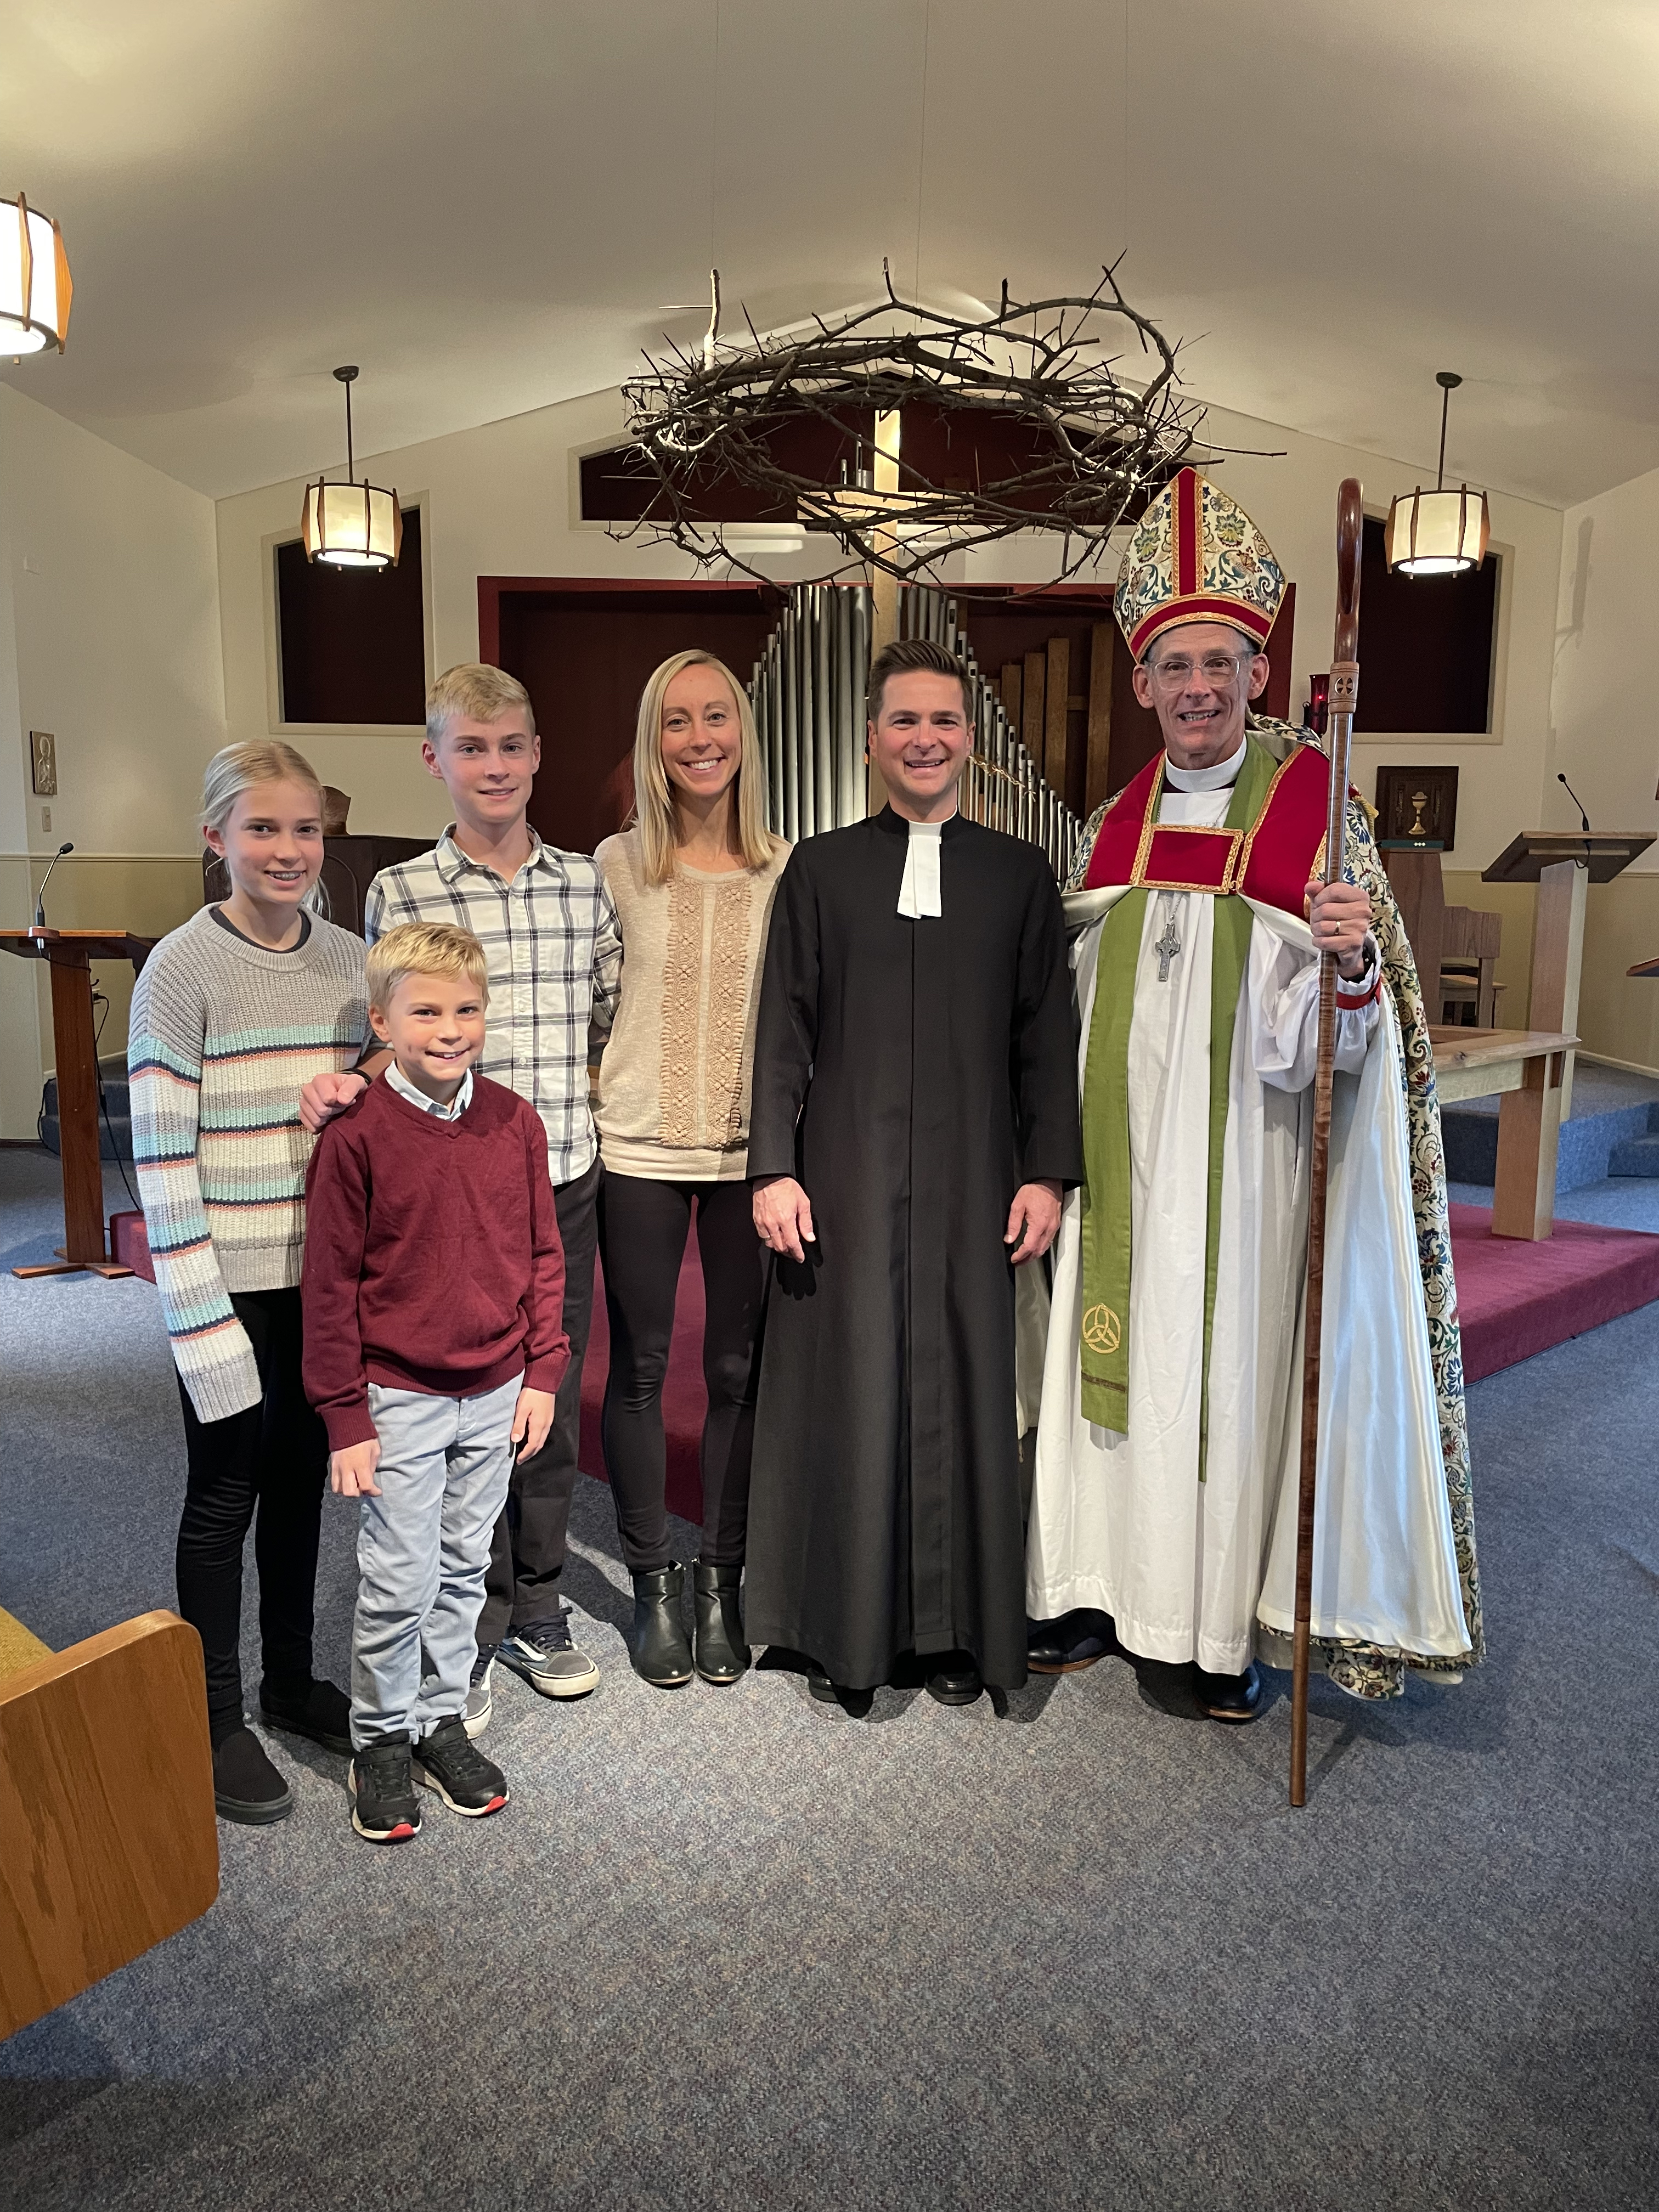 The Rev. Dr. James Arcadi with his family and Bishop Alex